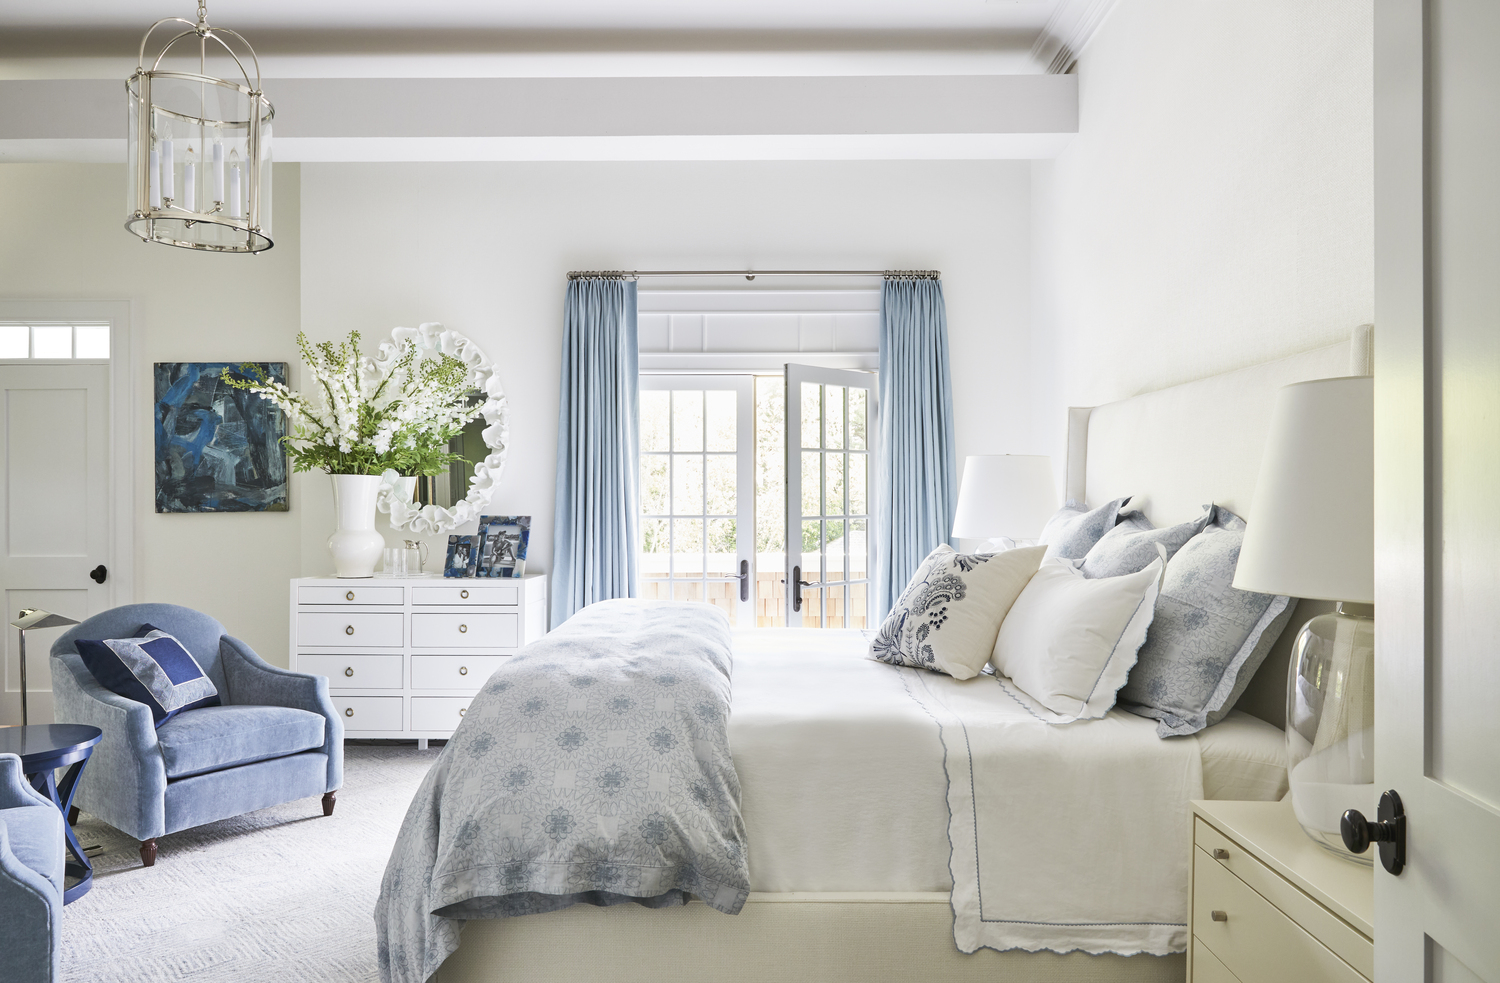 The primary bedroom also features a summery blue palette.   GENEVIEVE GARRUPPO